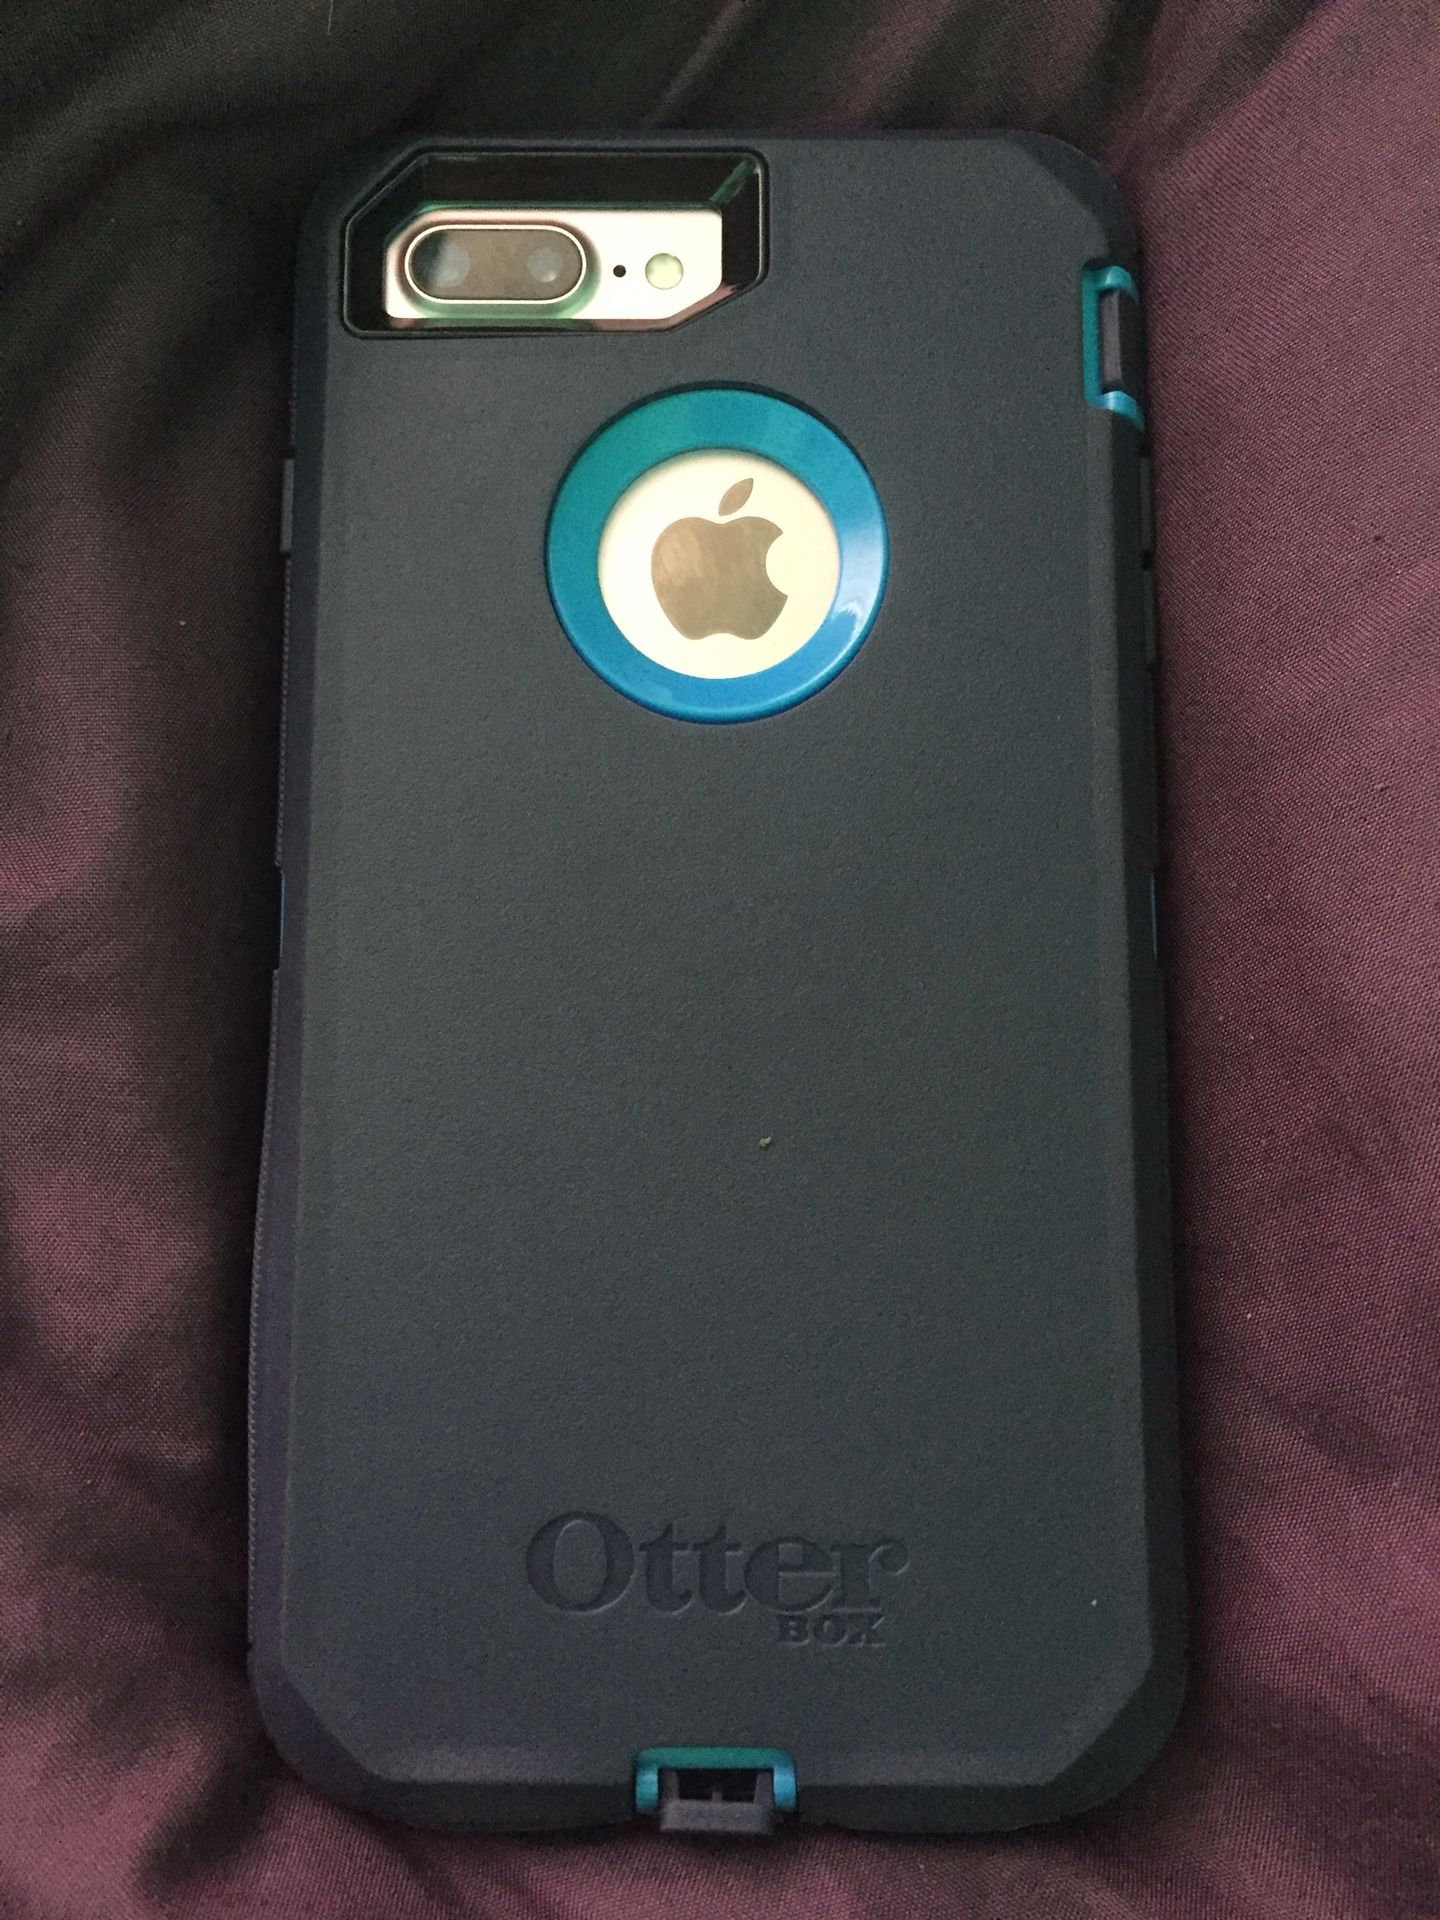 Iphone 7 with otter box case